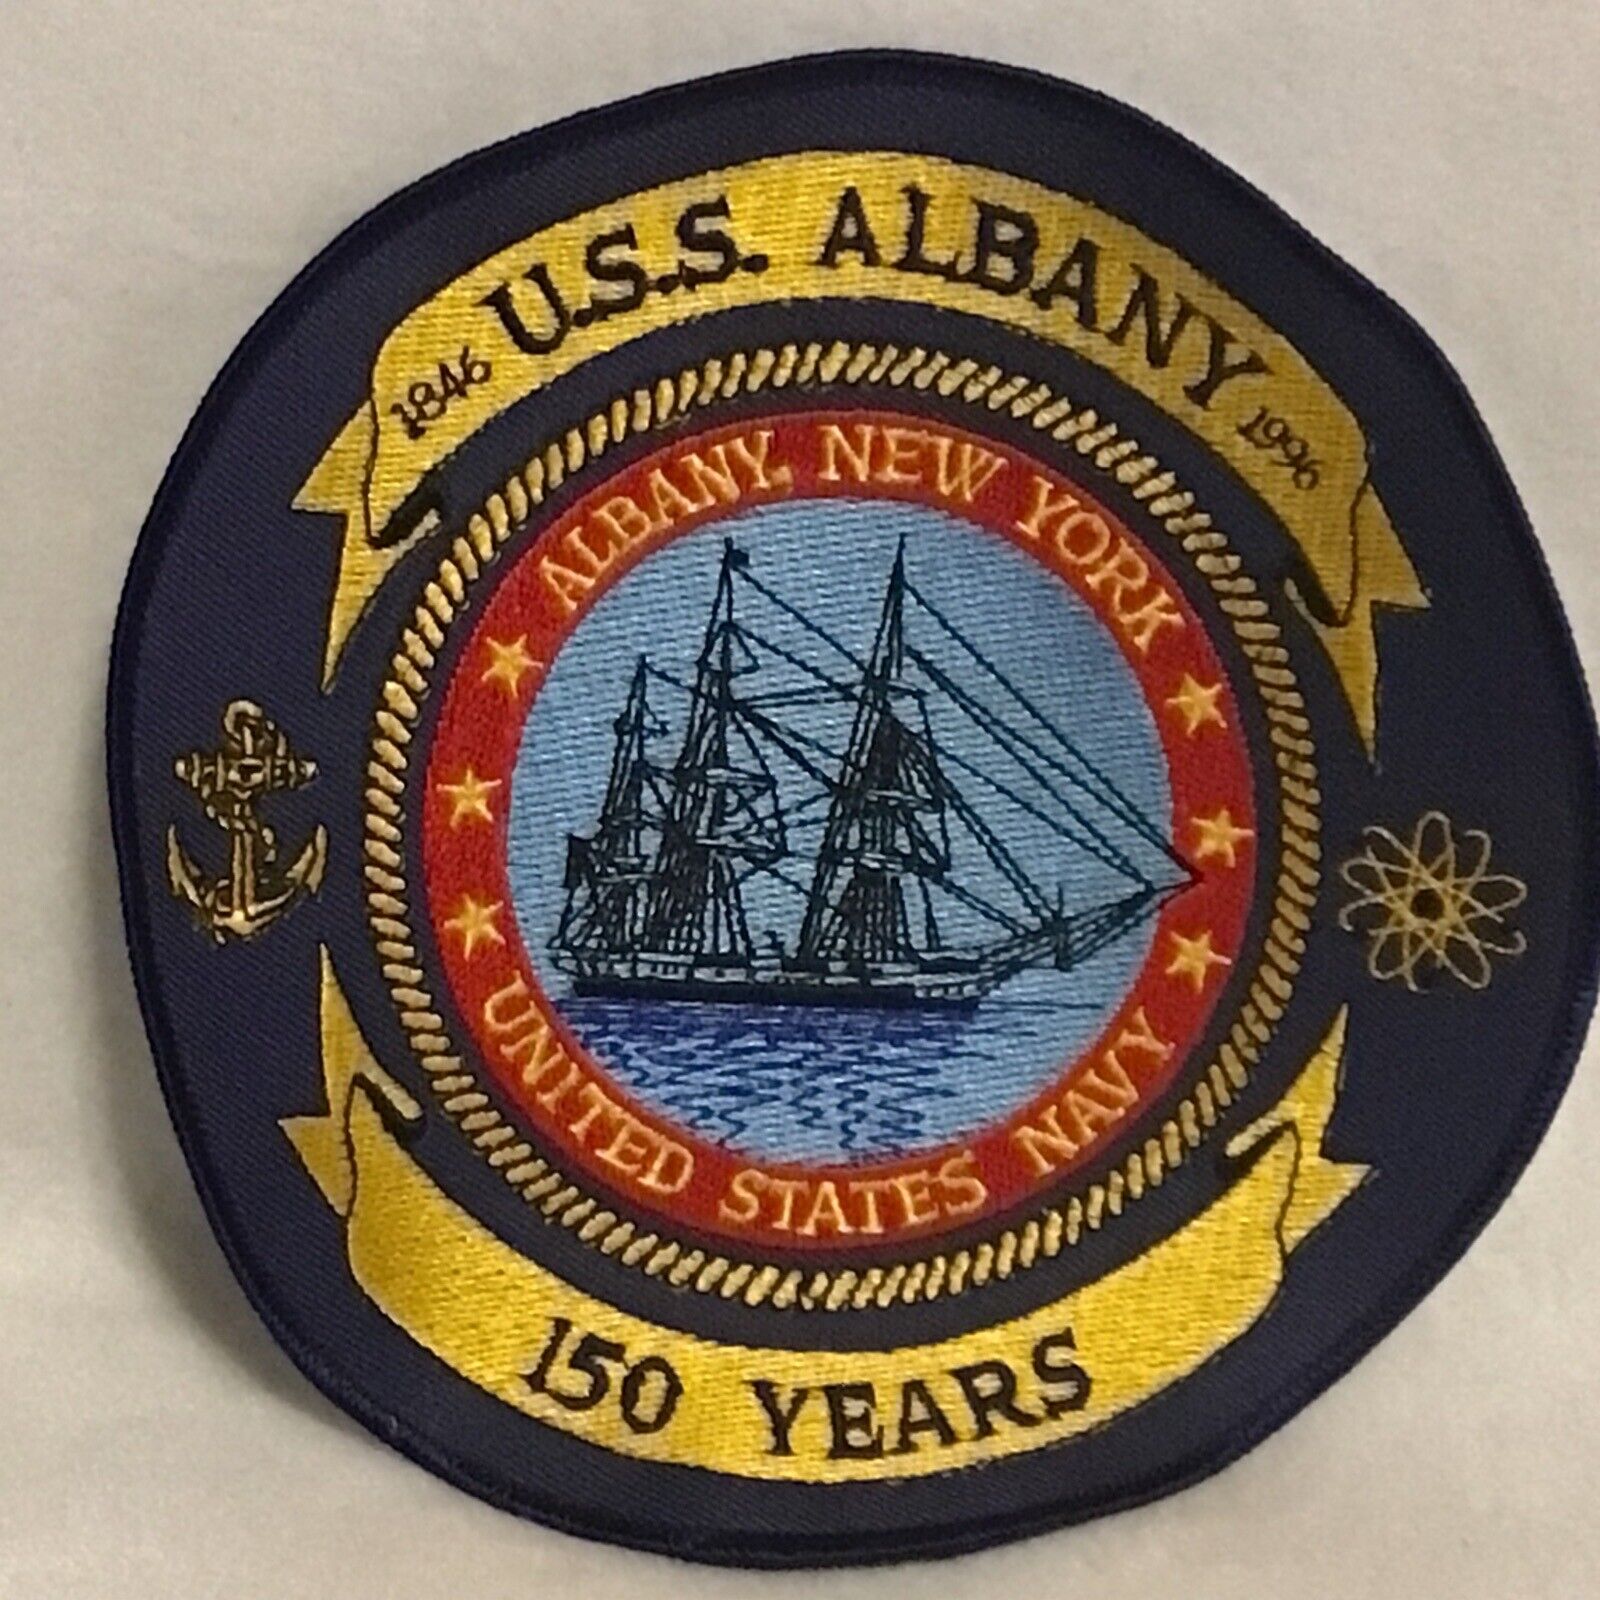 NOS Vintage 1996 USS Albany 150th Anniversary Of Creation Albany, NY Patch